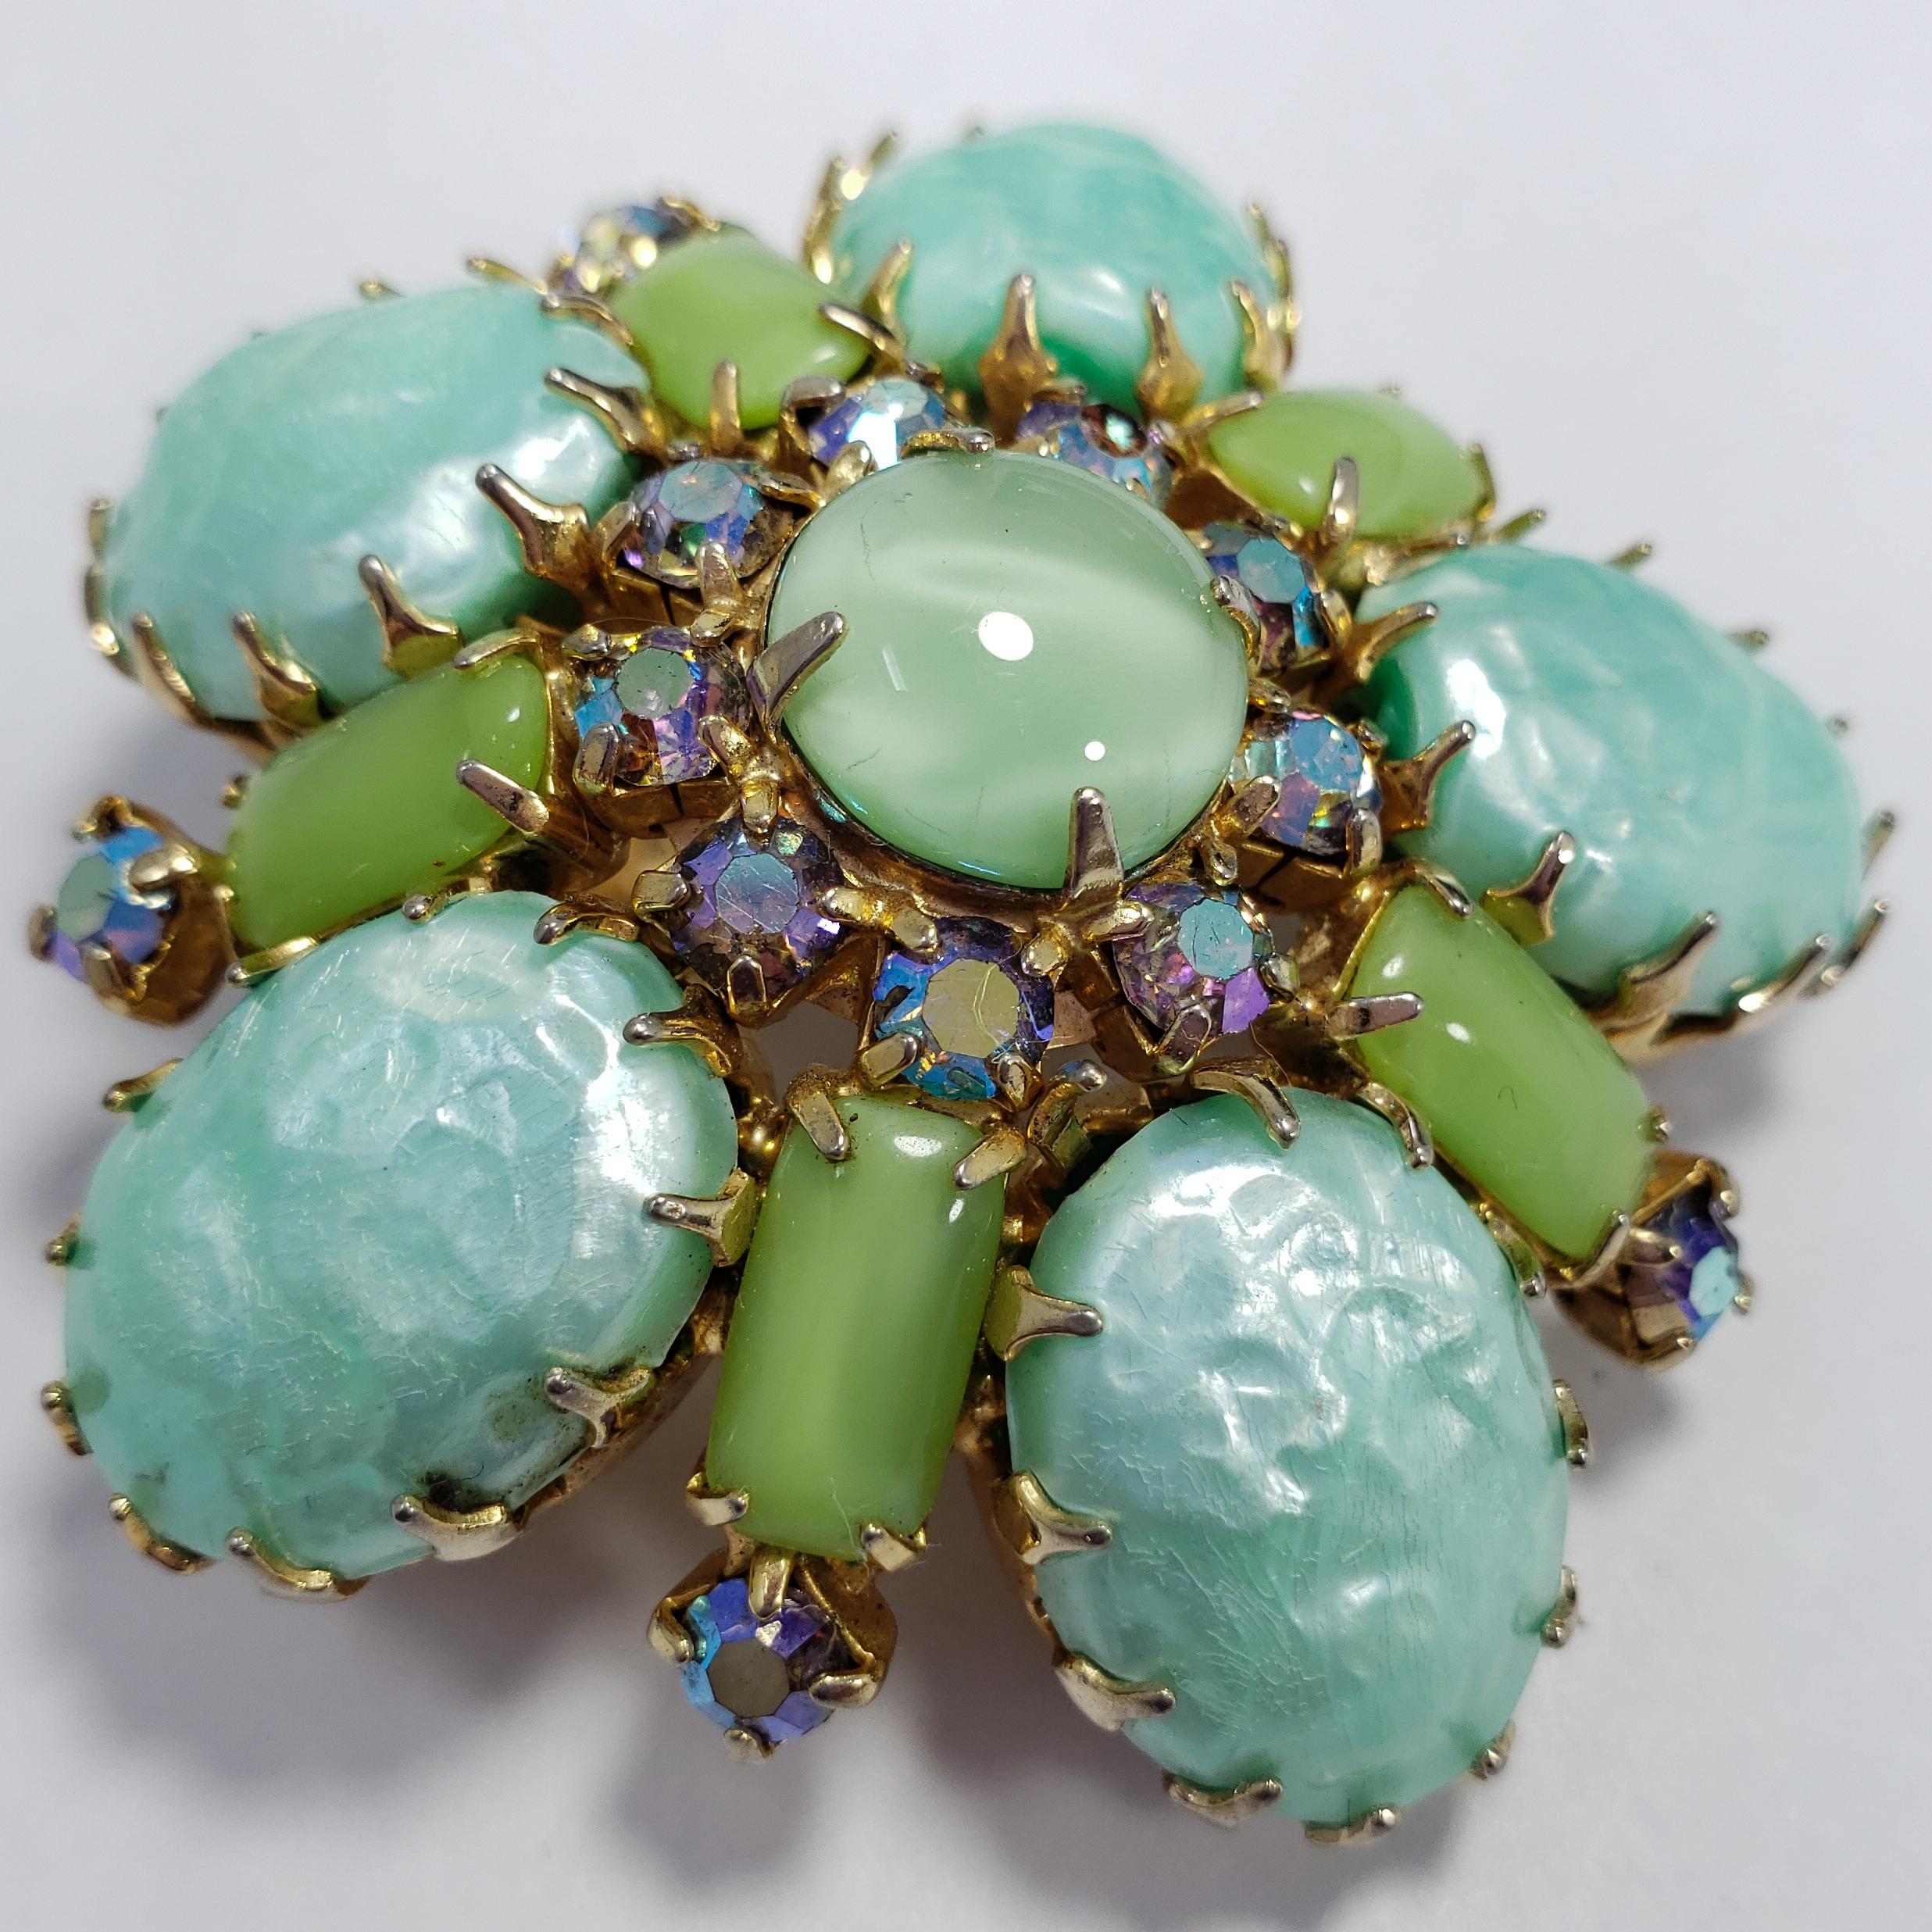 An exquisite round brooch by an unknown designer from the mid-1900s. Features prong-set cabochons in a variety of green toes, accented with sparkling aurora borealis crystals. Set in vintage gold-tone metal setting.